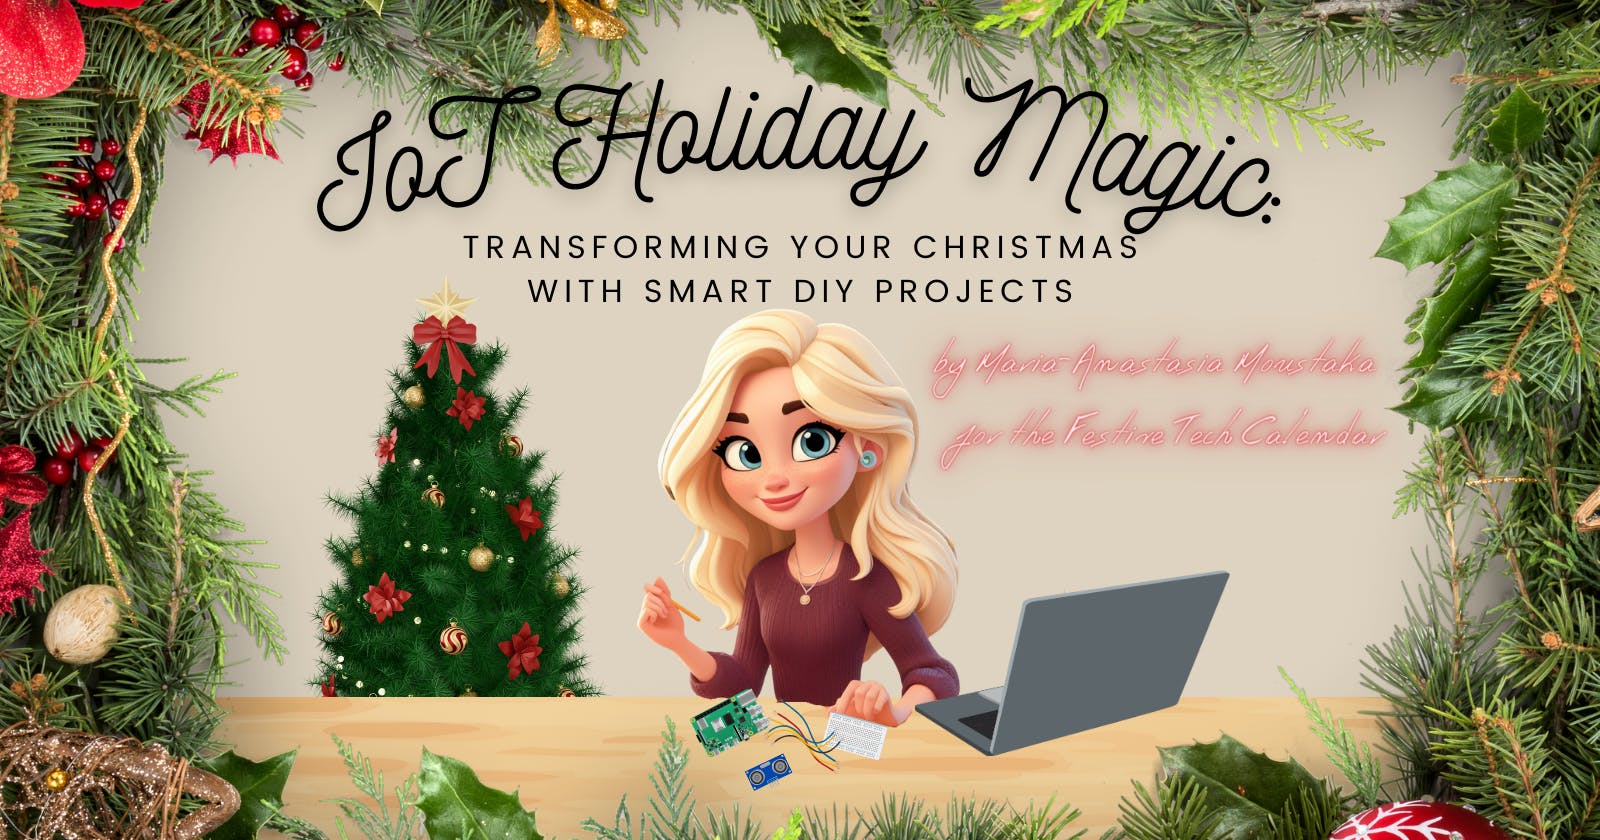 IoT Holiday Magic: Transforming Your Christmas with Smart DIY Projects